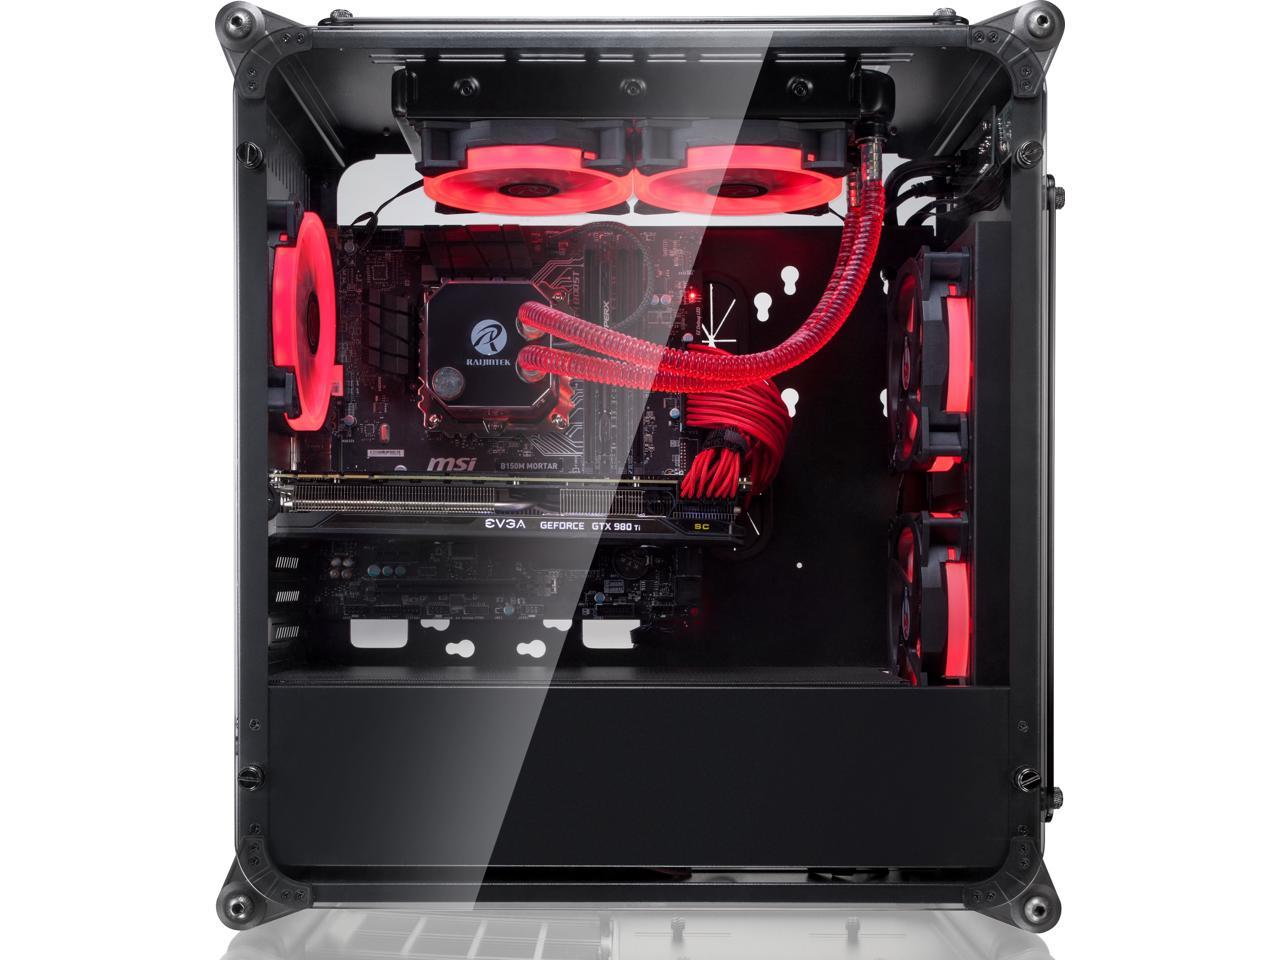 COEUS ELITE TC, a Micro-ATX Gaming Case with Tempered Glass and 3*12025 LED Fans